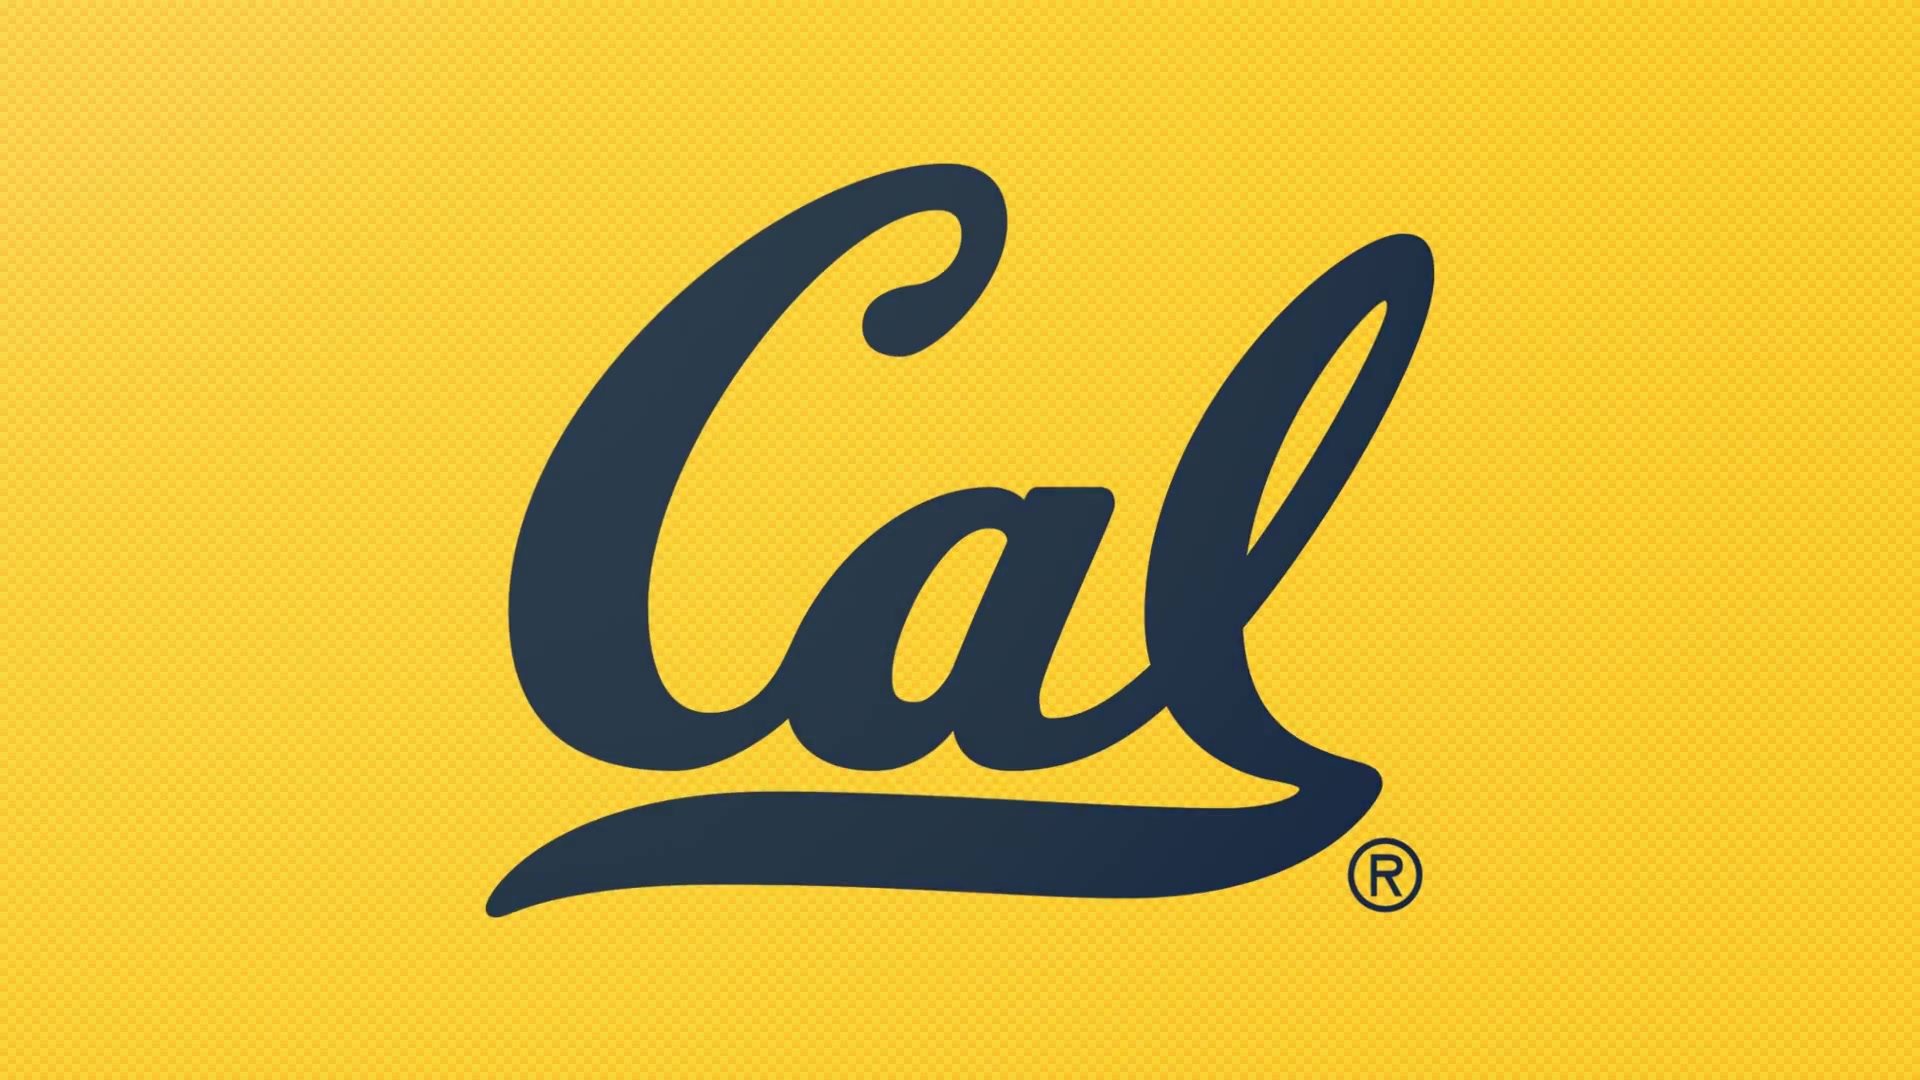 Cal Football: Zeb Chaney Reflects on His Coaching Days